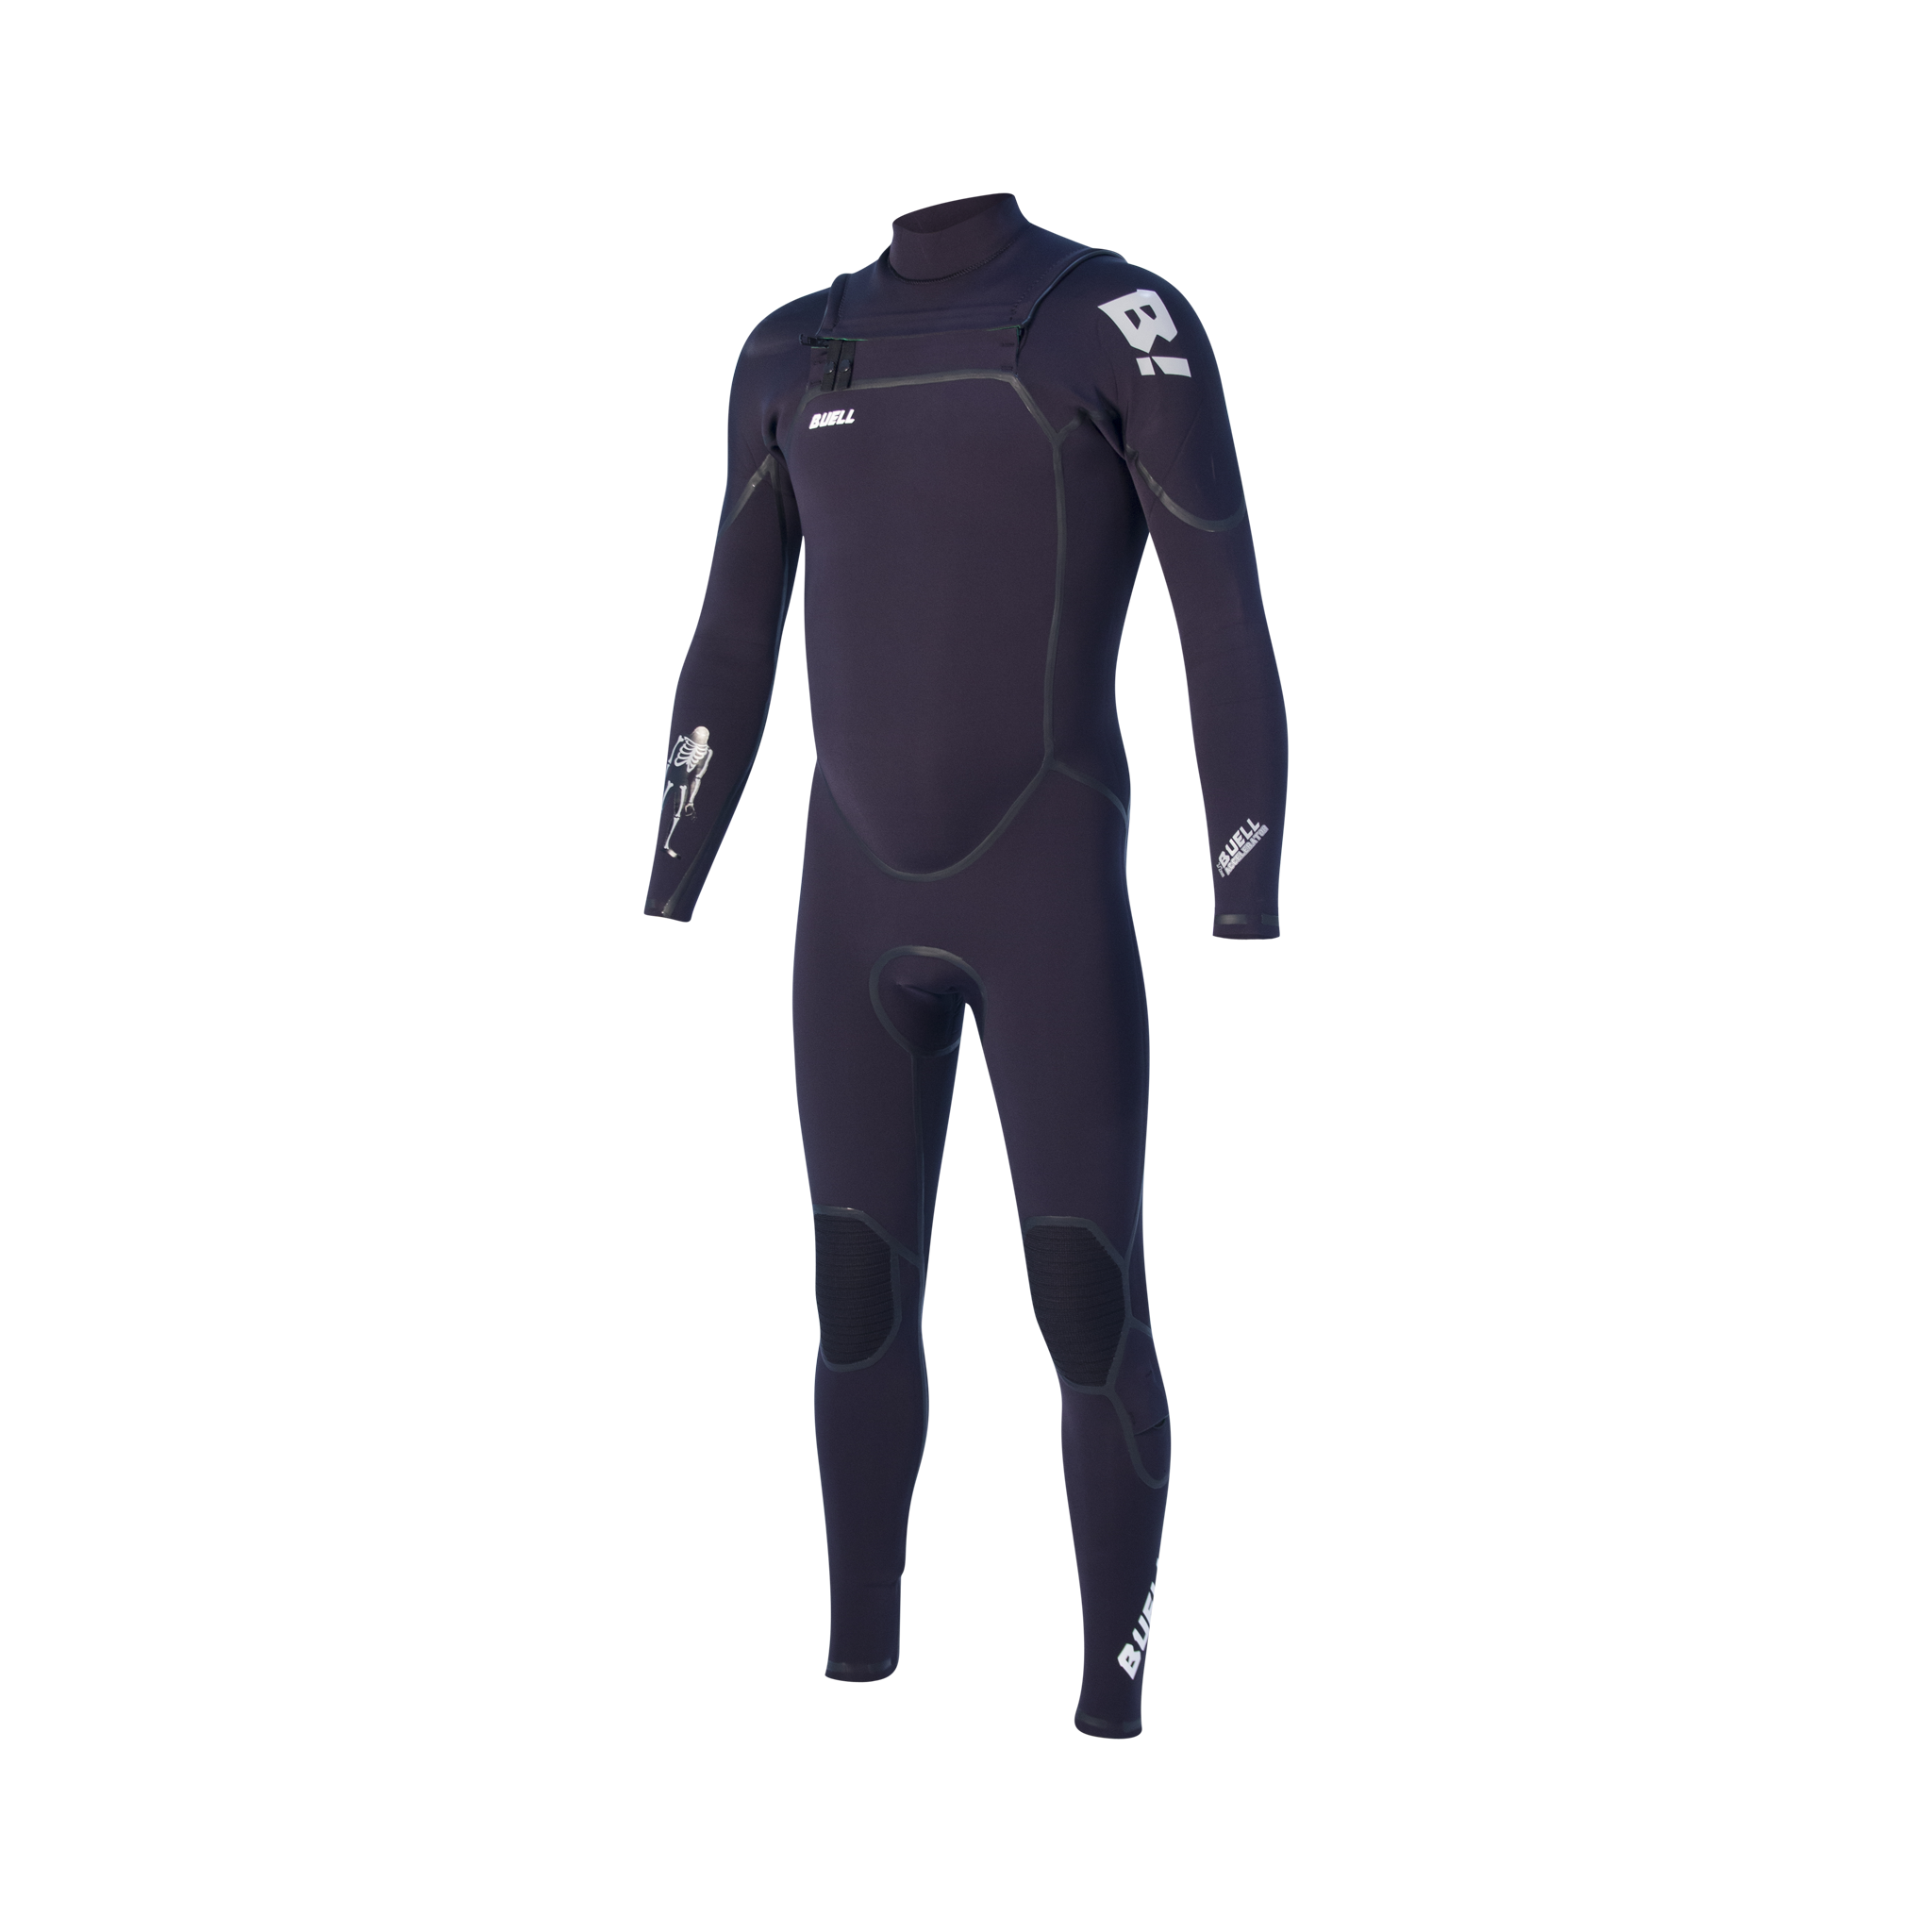 Buell RB1 Accelerator 4/3 Wetsuit - Frot Zip